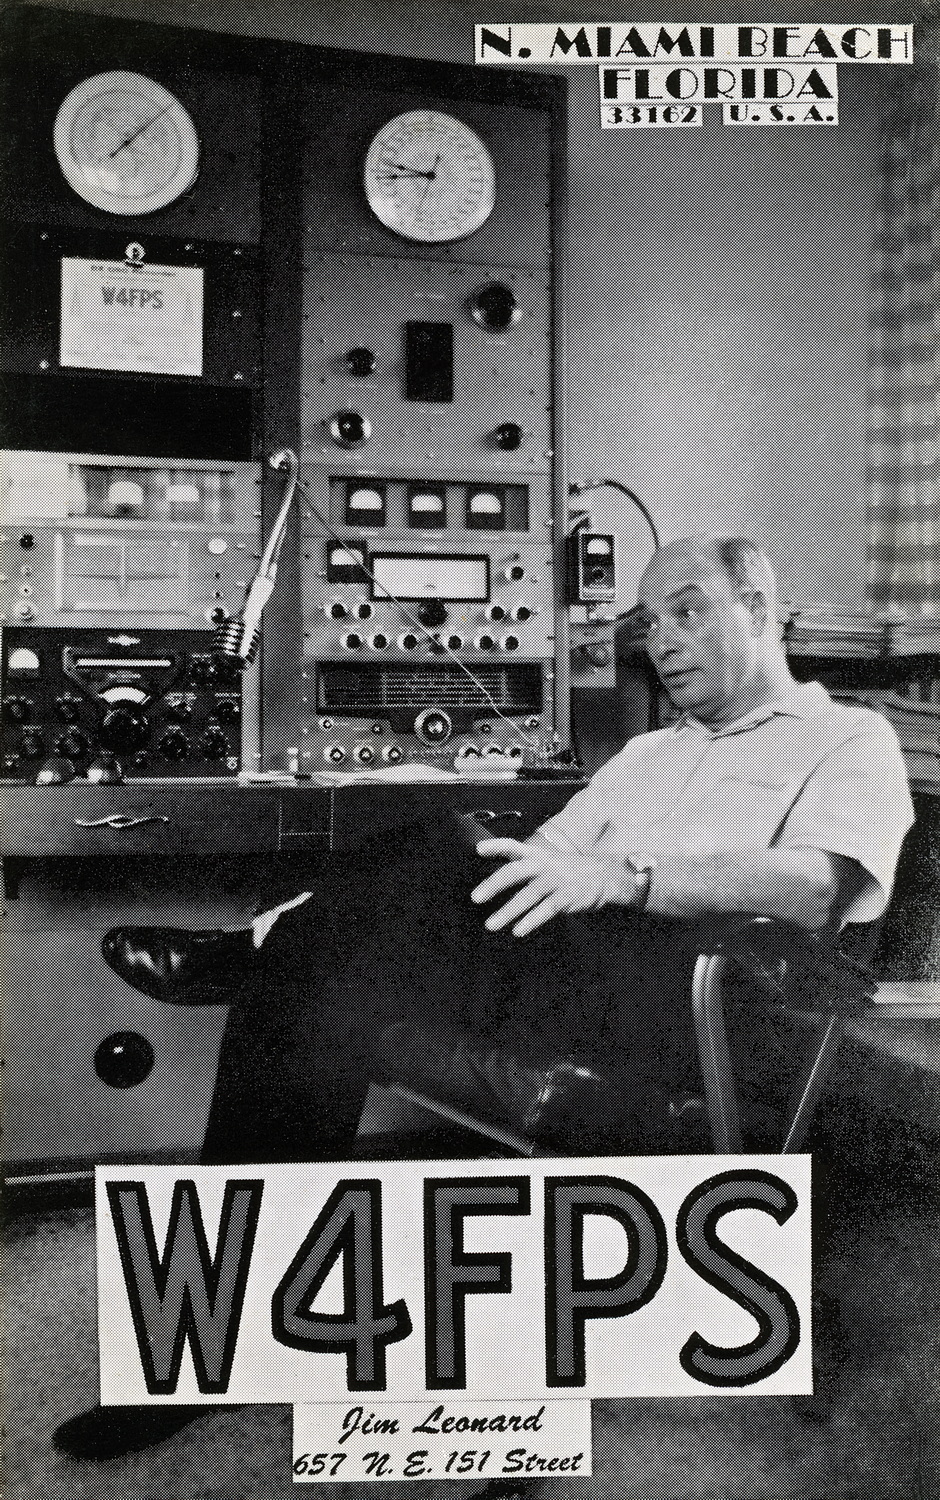 W4FPS (Jim), QSO, 1 minute past midnight on 25th July 1966, Transmitter 4-400's, Exciter Home Made, and the Receiver was 75S3B and a 754A.